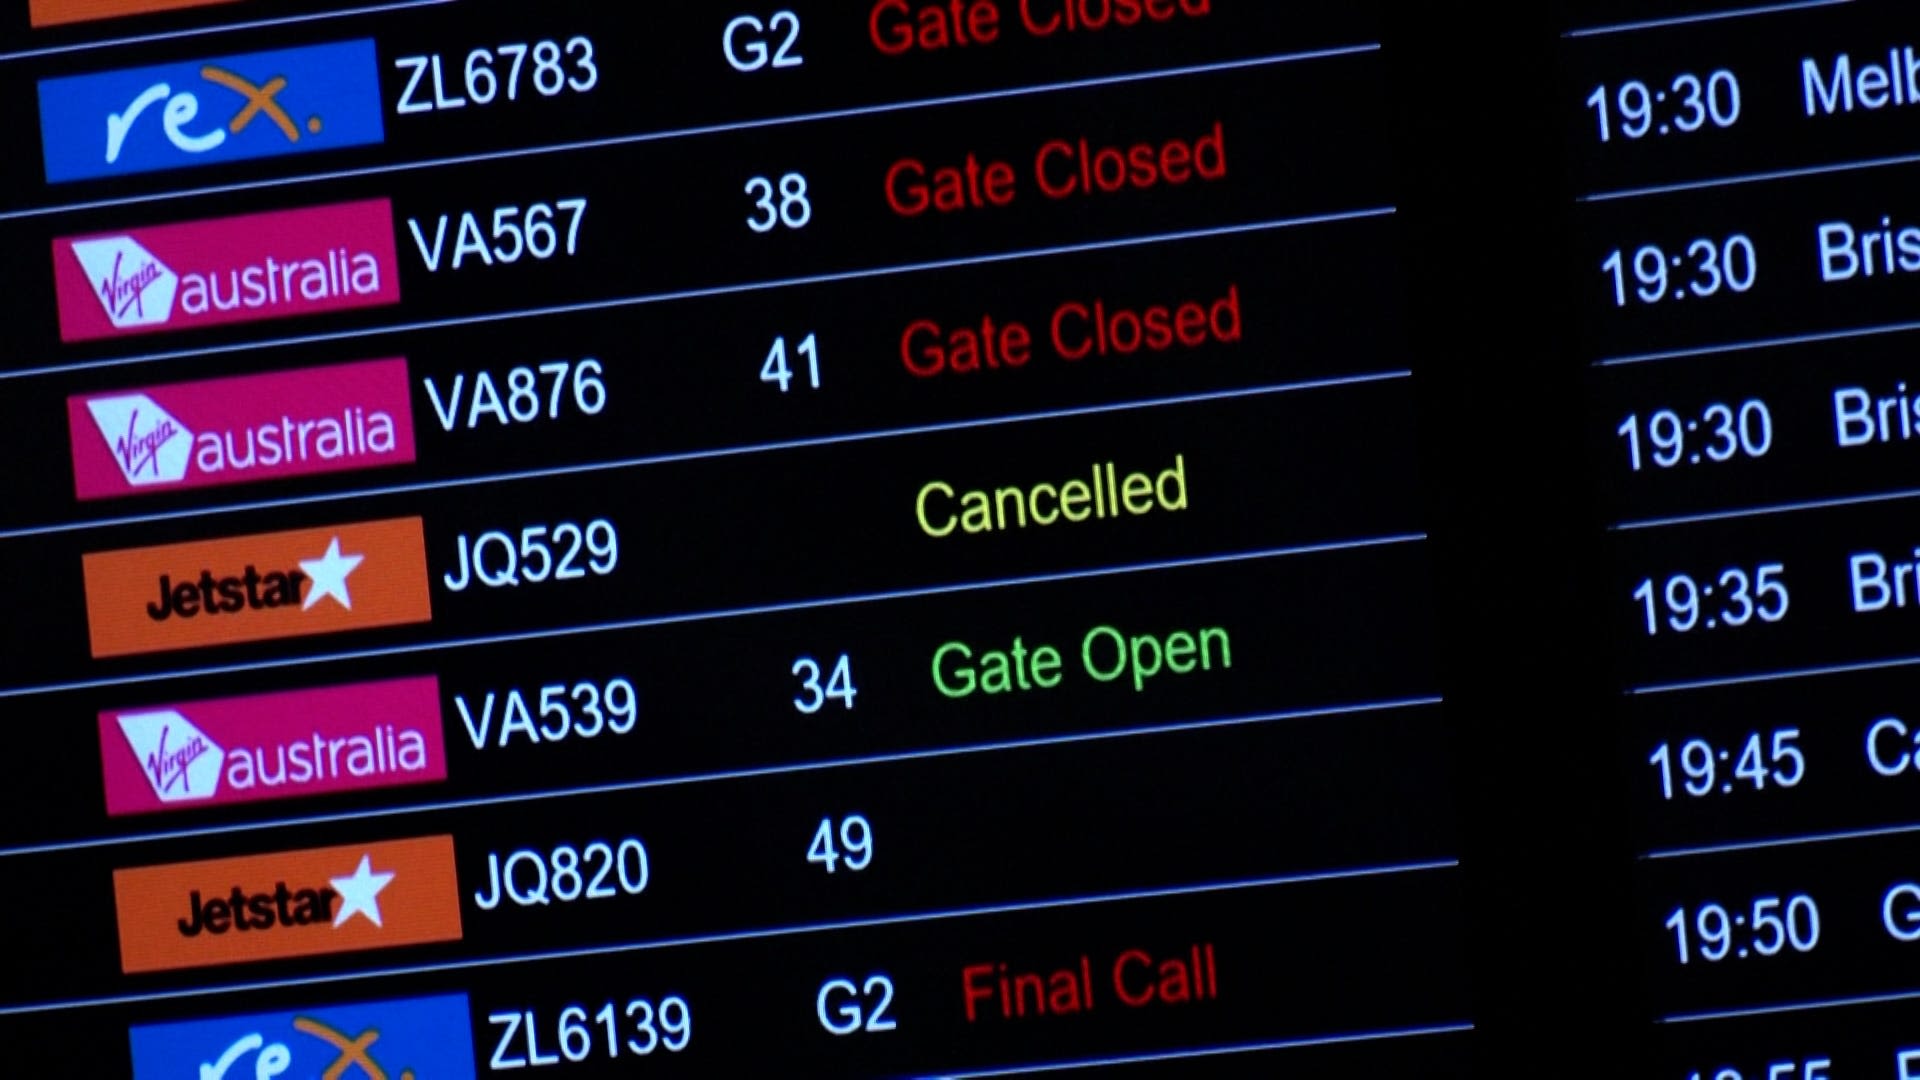 Microsoft outage delays flights in Des Moines. What to know about flight issues today.